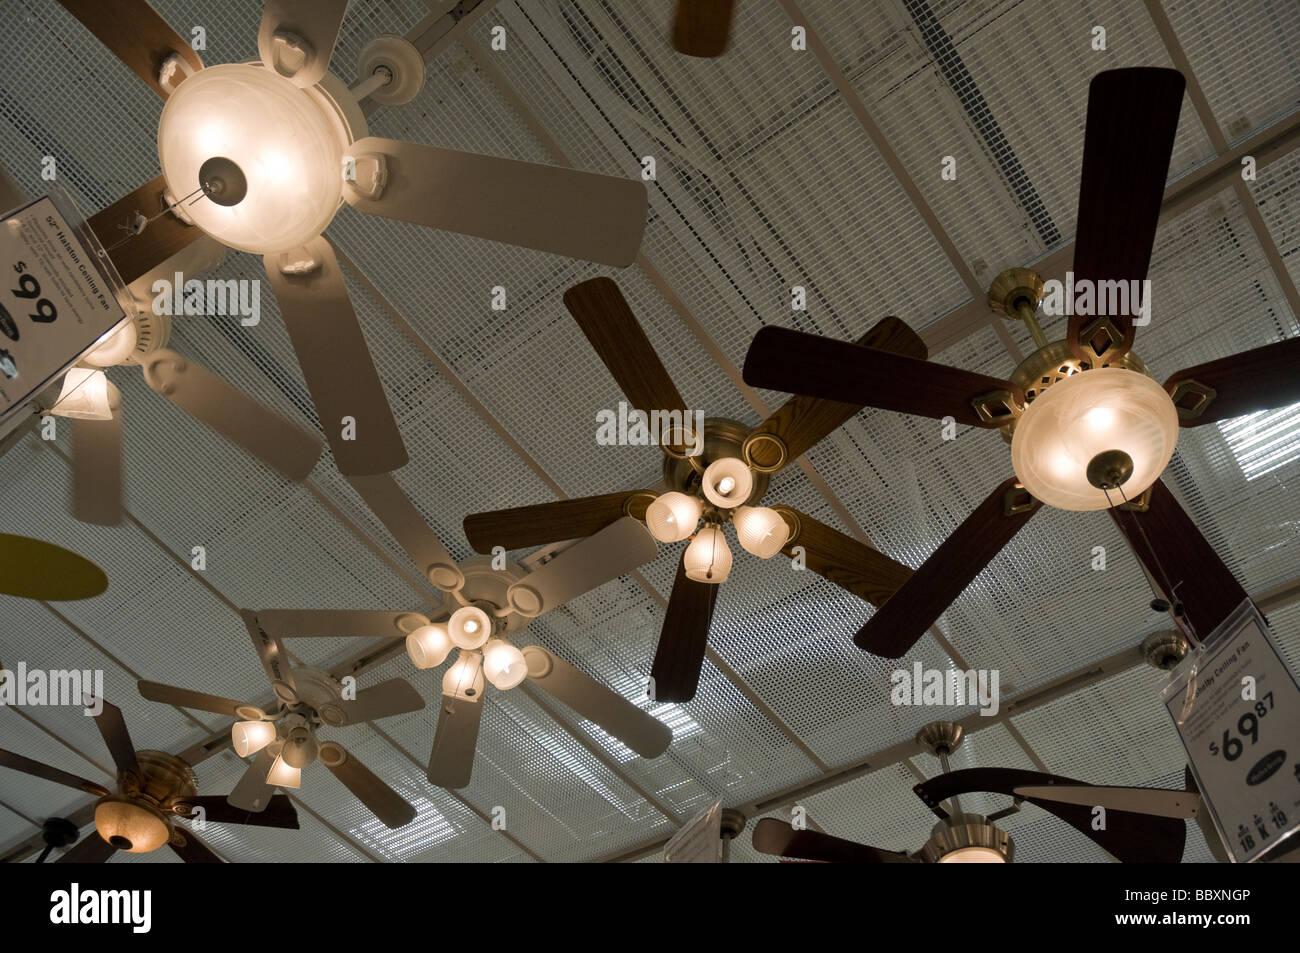 Ceiling Fans And Lights Hanging From Ceiling Of Lowe S Home